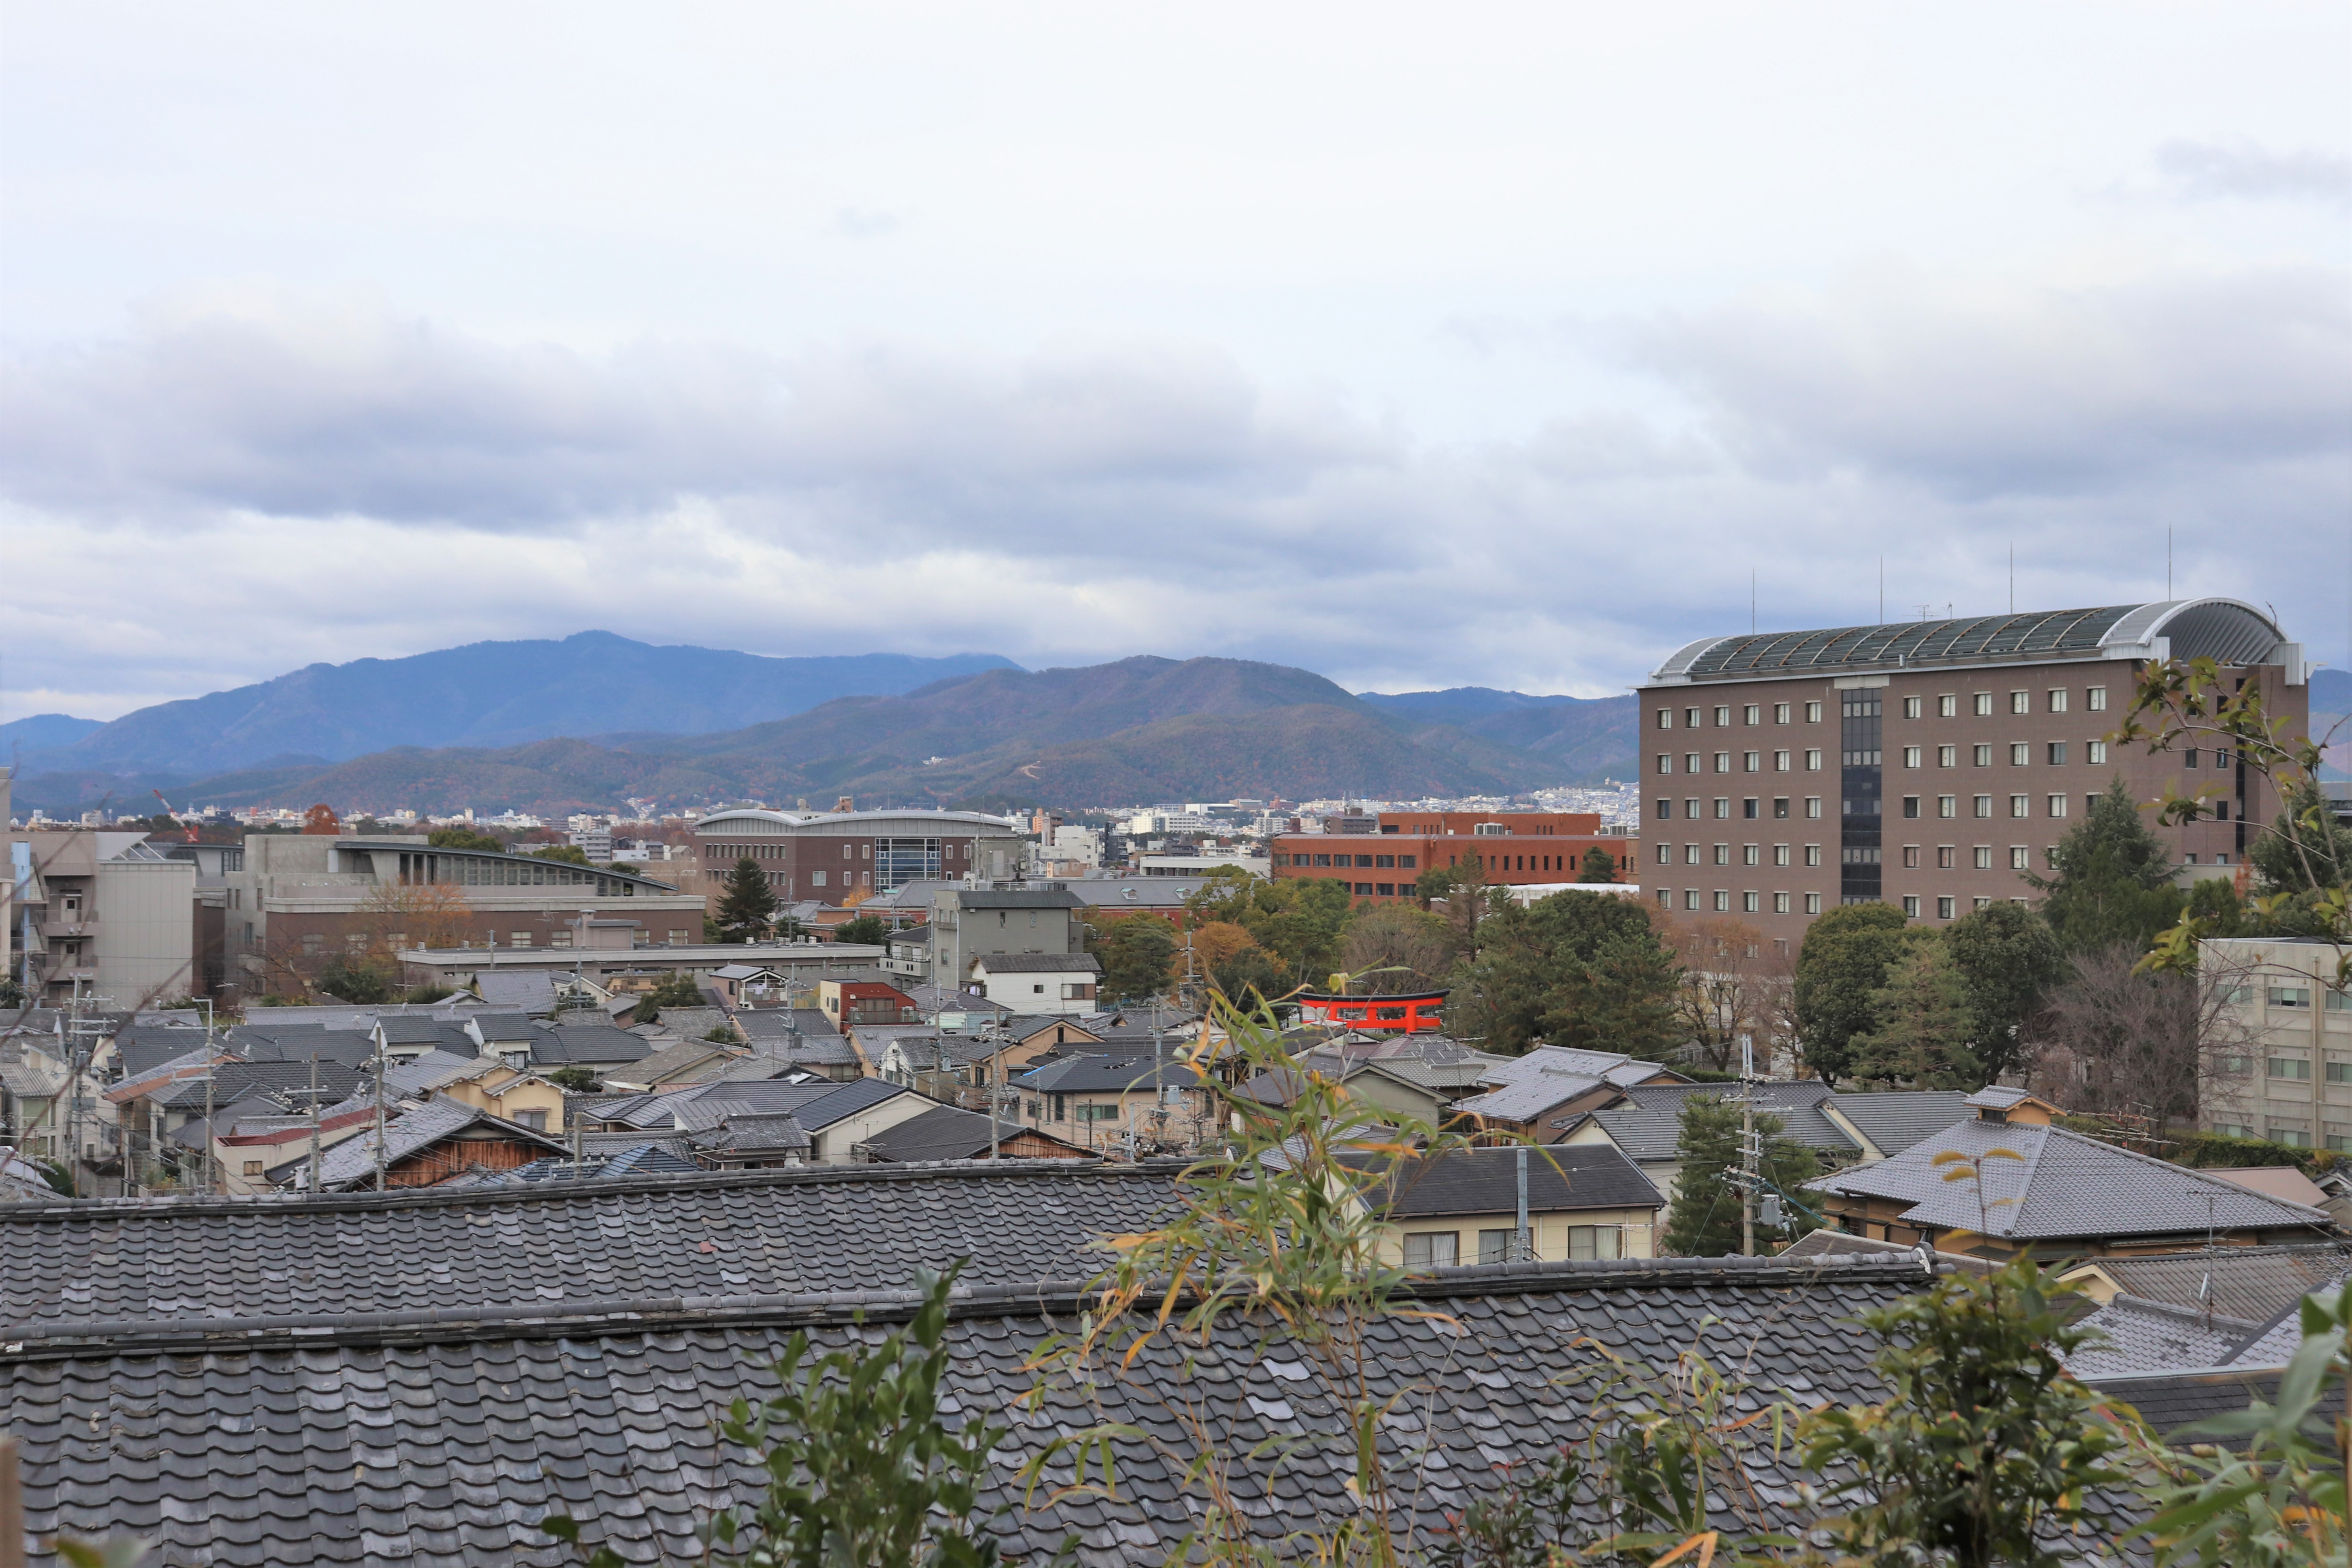 View of Kyoto City and Kyoto university from Yamakage Shrine.